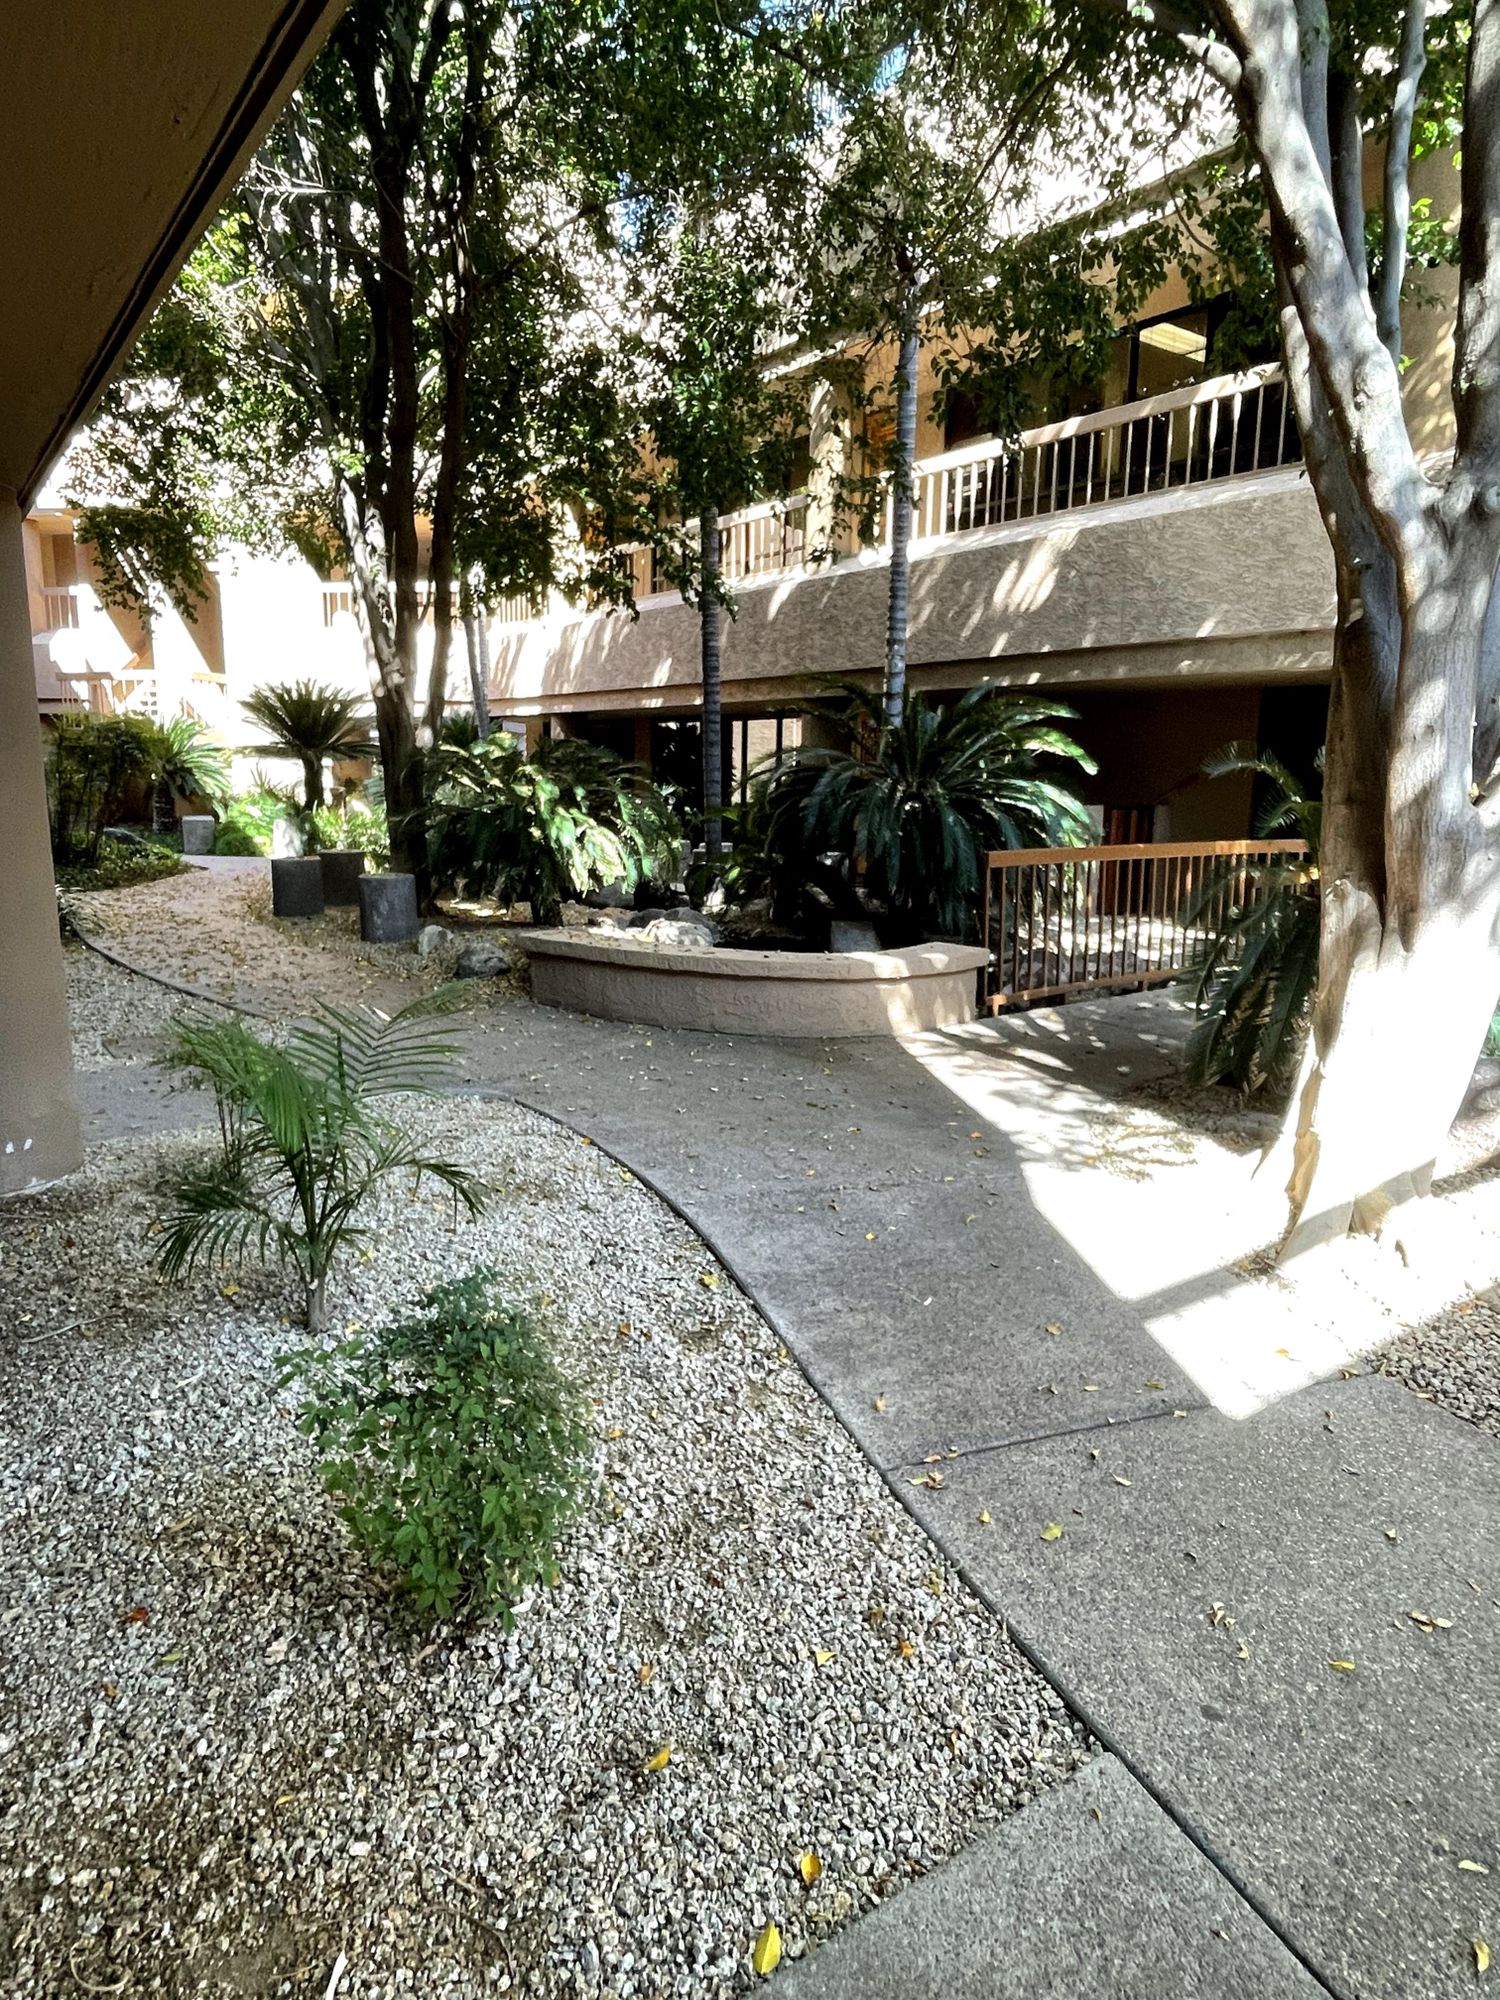 Gallery Photo of Office Courtyard